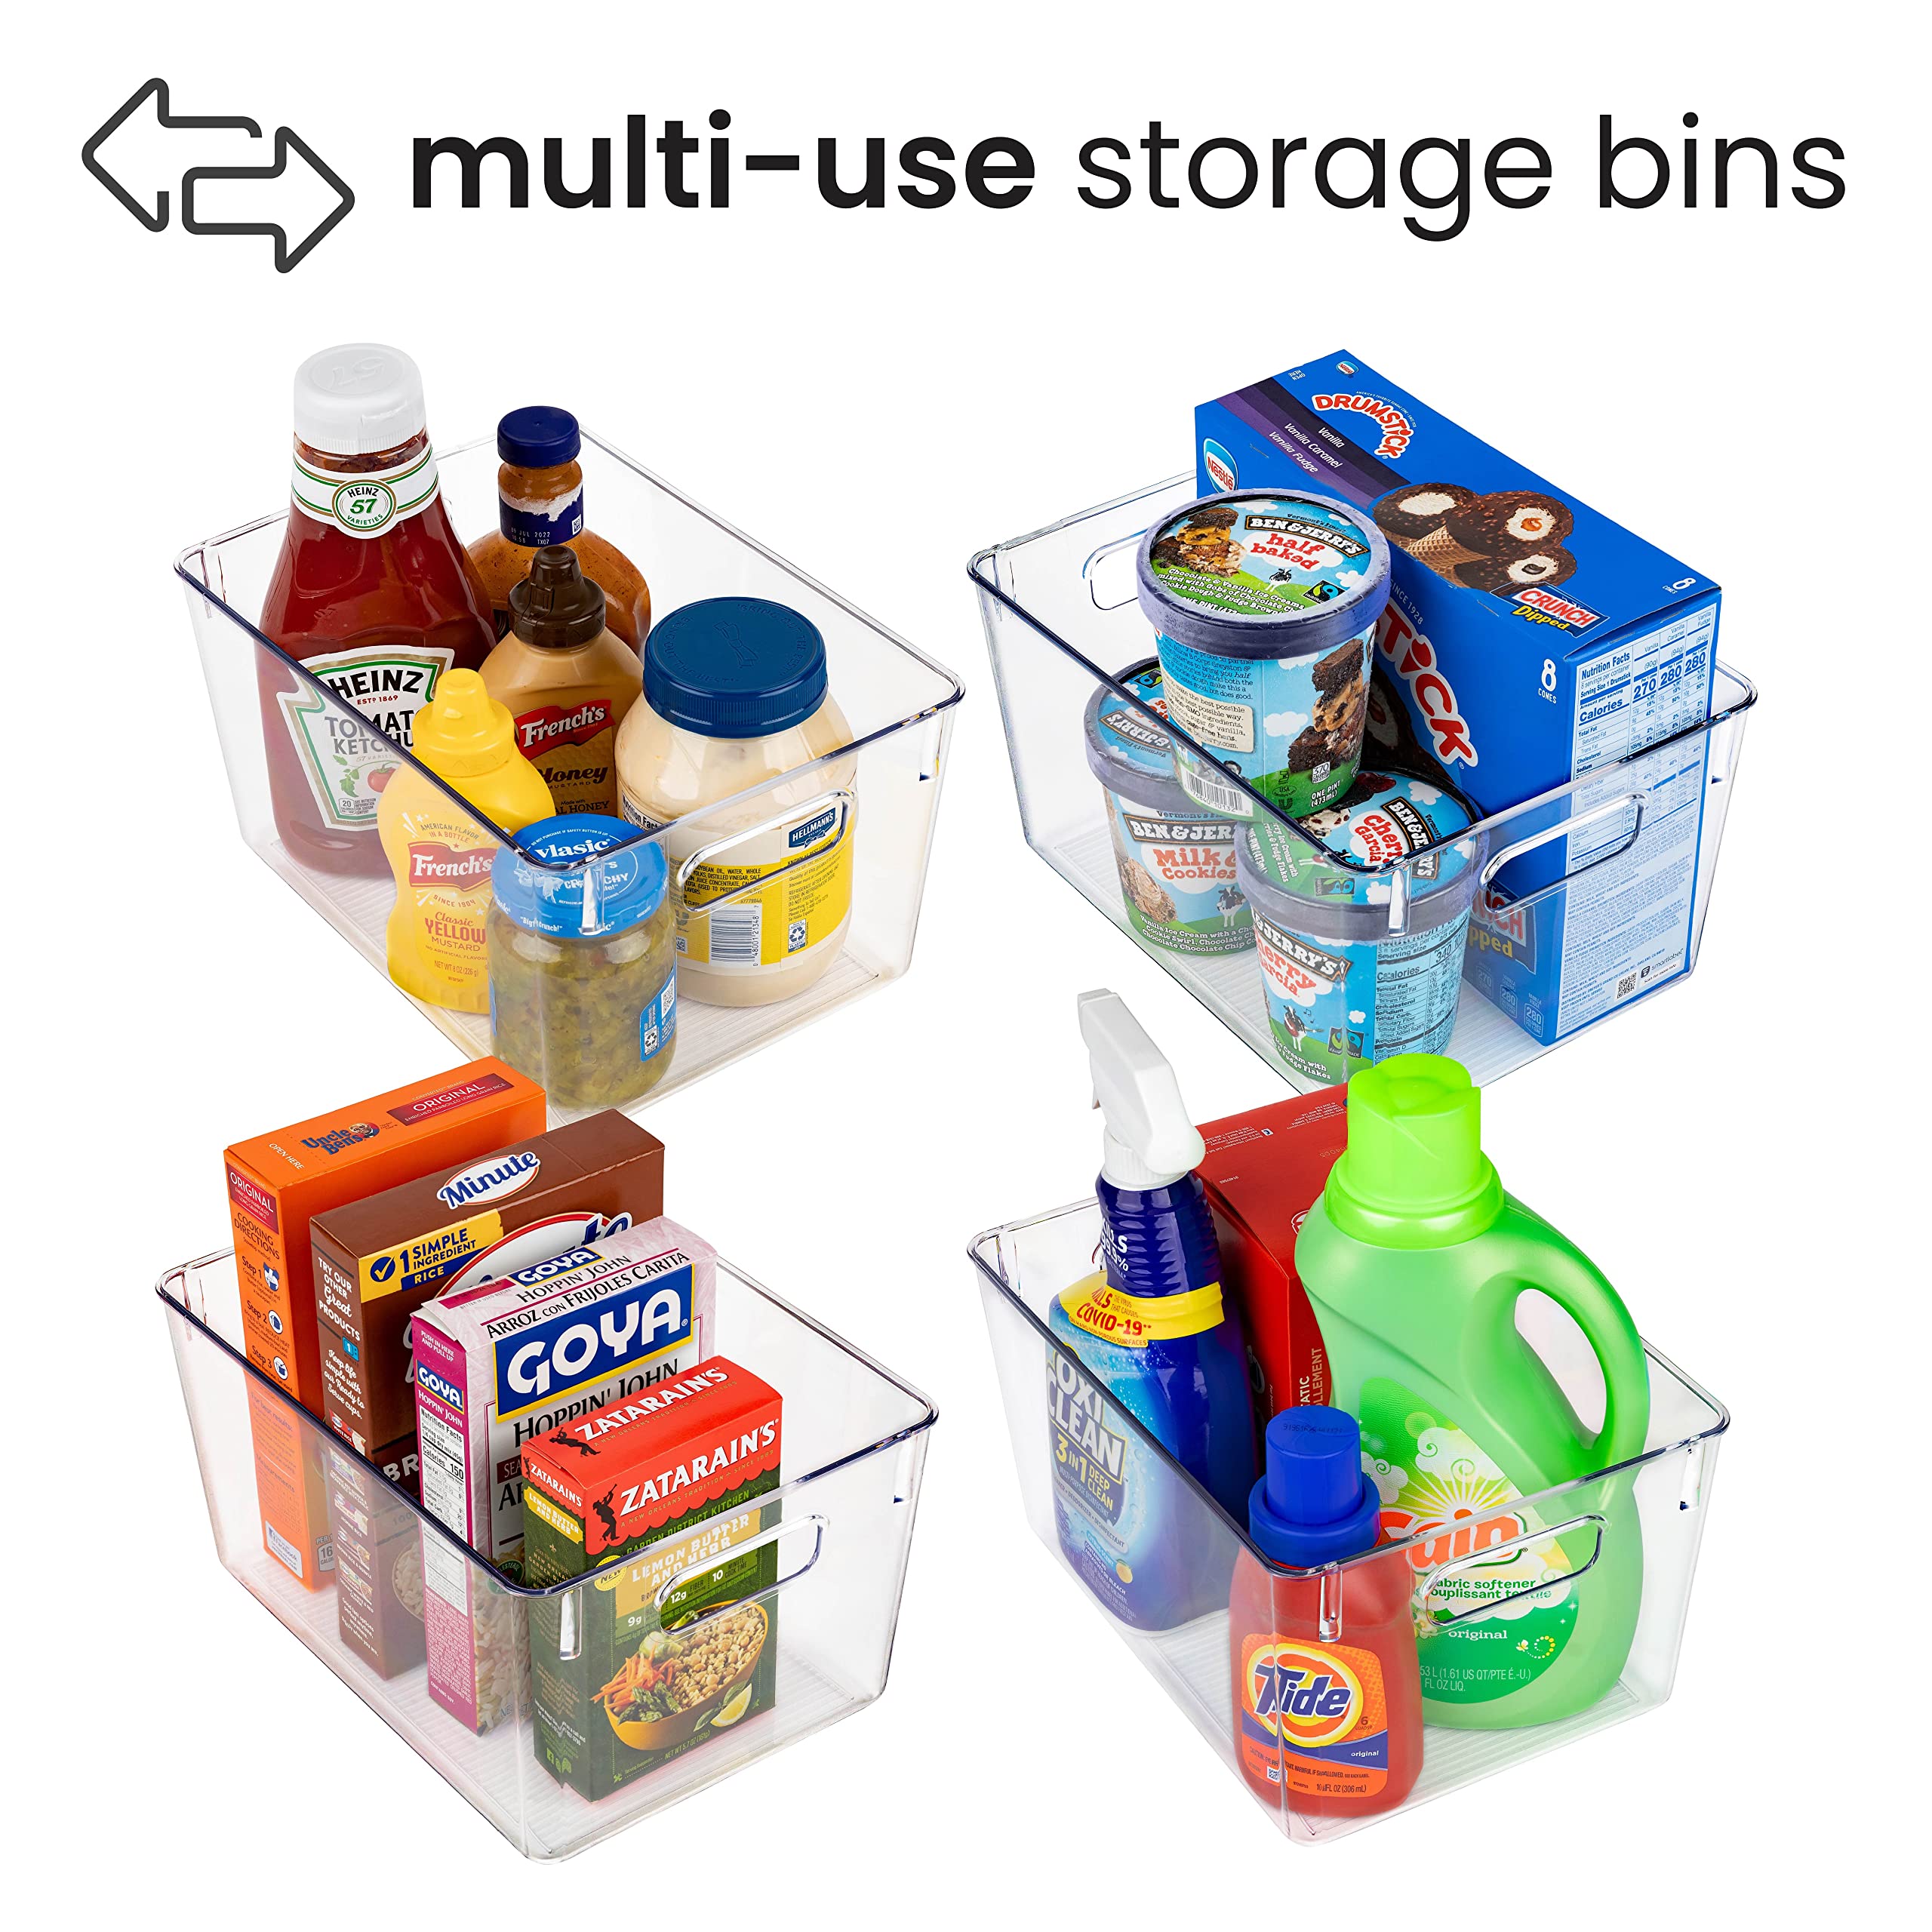 Homeries Pantry Organizer And Storage bins, Clear Cabinet Organizers And Storage for Kitchen, Pantry, Cabinets, Countertops, for Storing Packets, Spices, Sauce, Snacks, Cans,  - Good